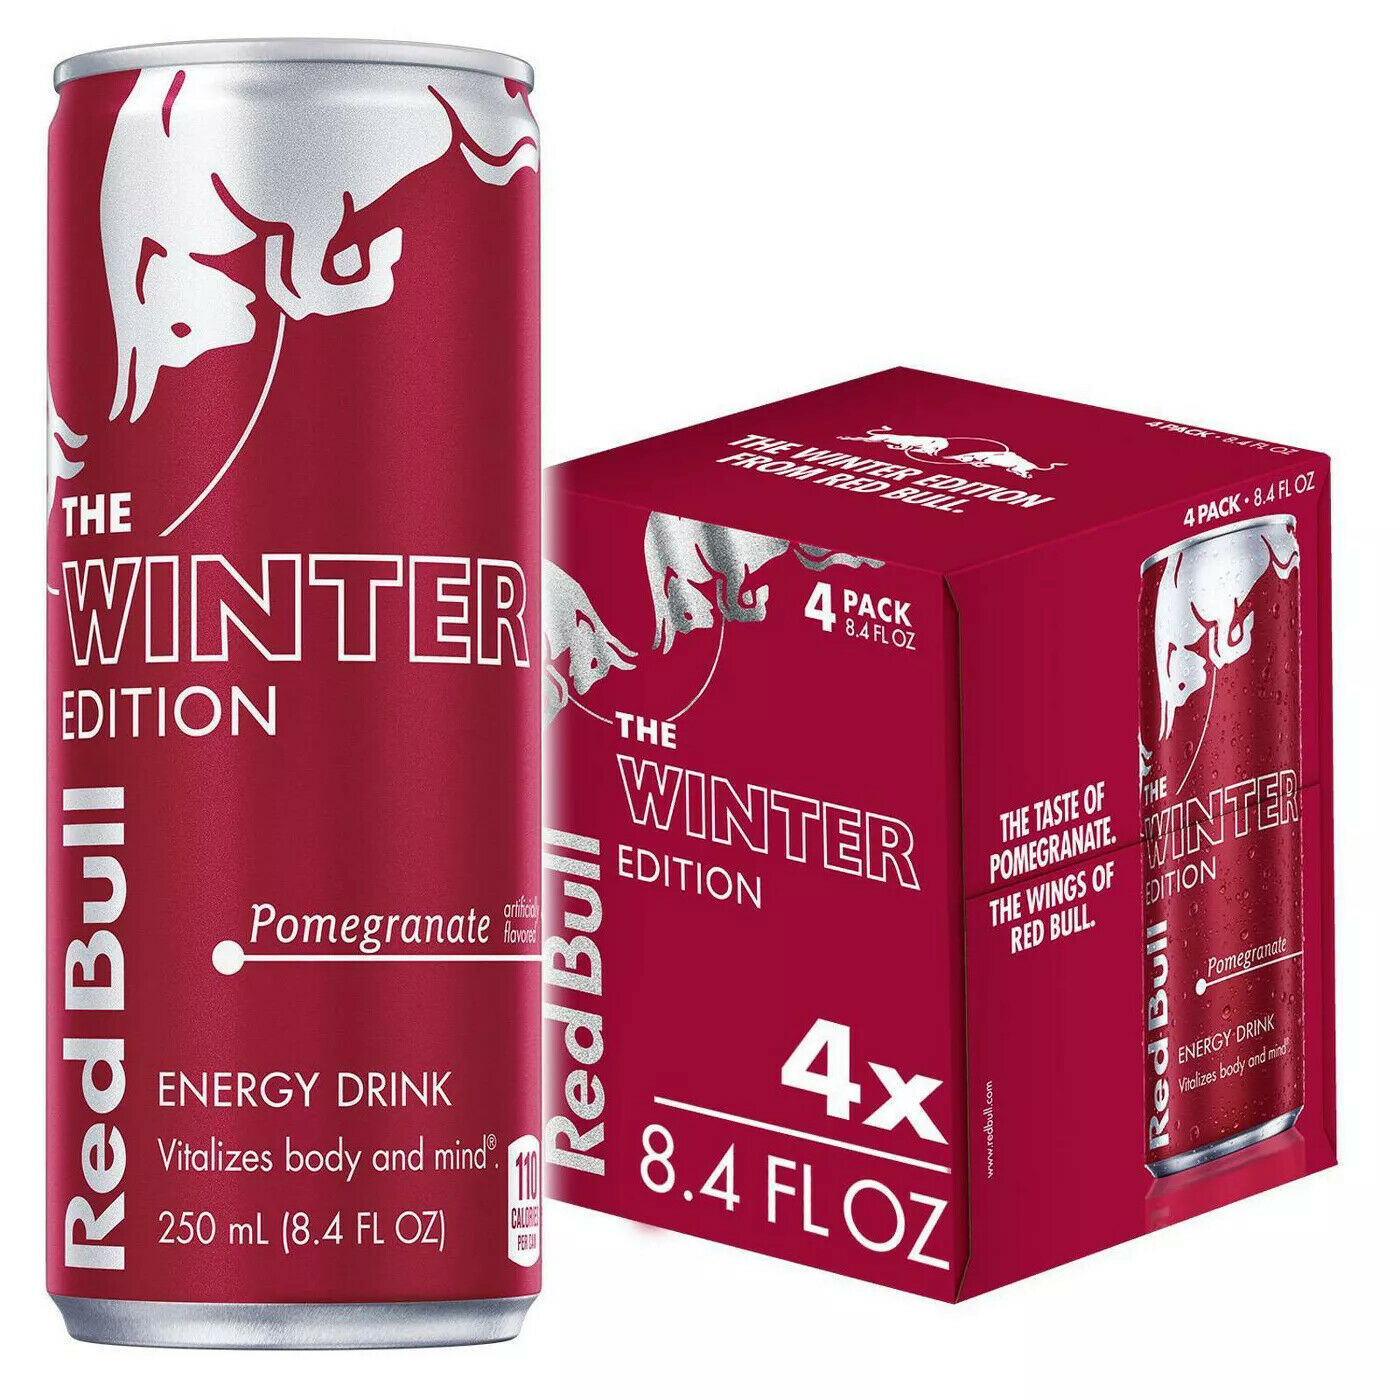 Red Bull The Winter Edition Pomegranate 8.4oz Cans SEALED 4 Pack Exp. 7